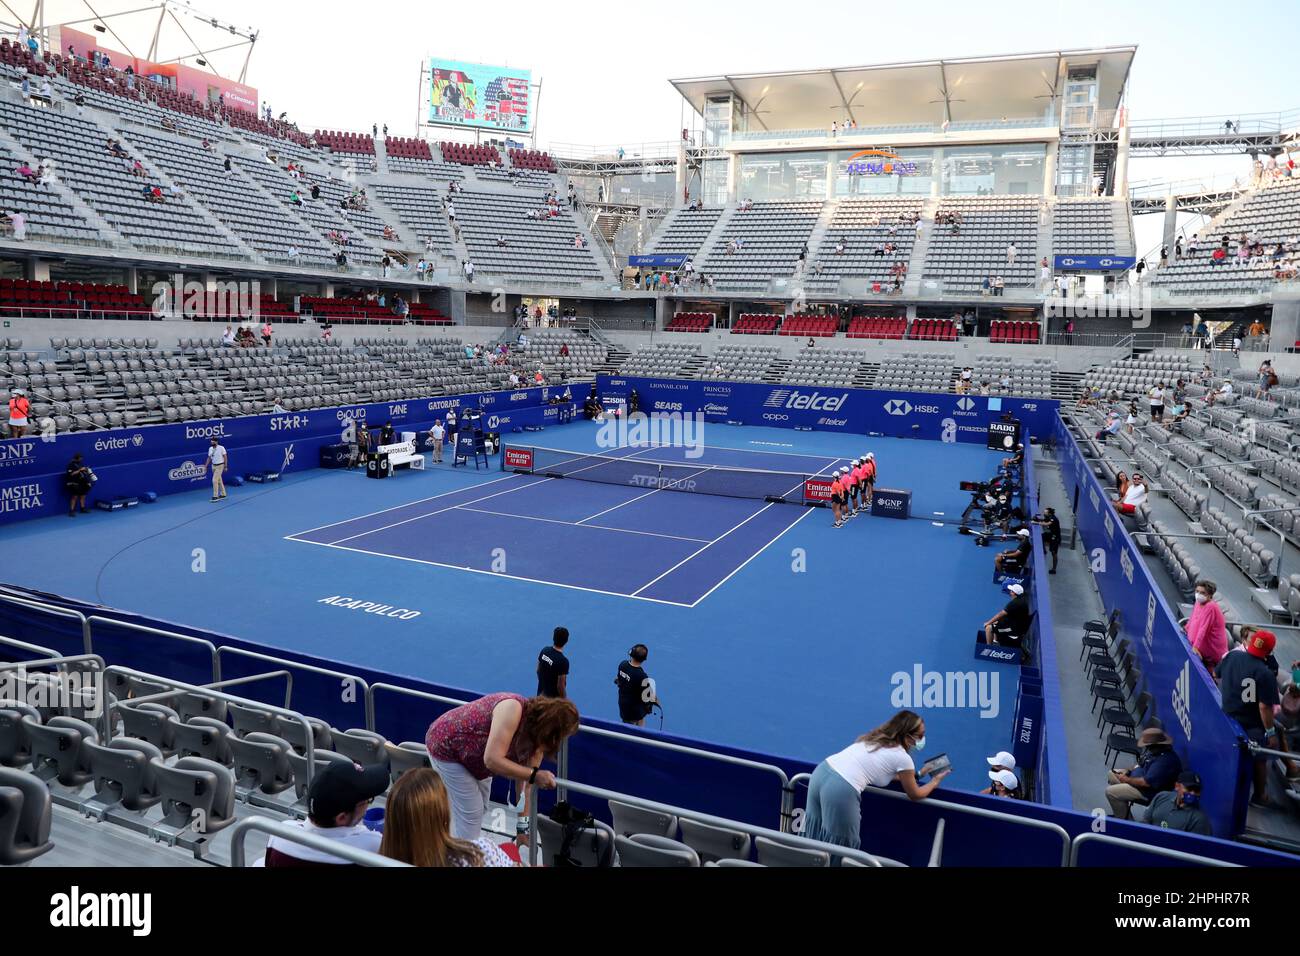 Tennis - ATP 500 - Abierto Mexicano - The Fairmont Acapulco Princess,  Acapulco, Mexico - February 21, 2022 General view of the court before the  round of 16 match between John Isner